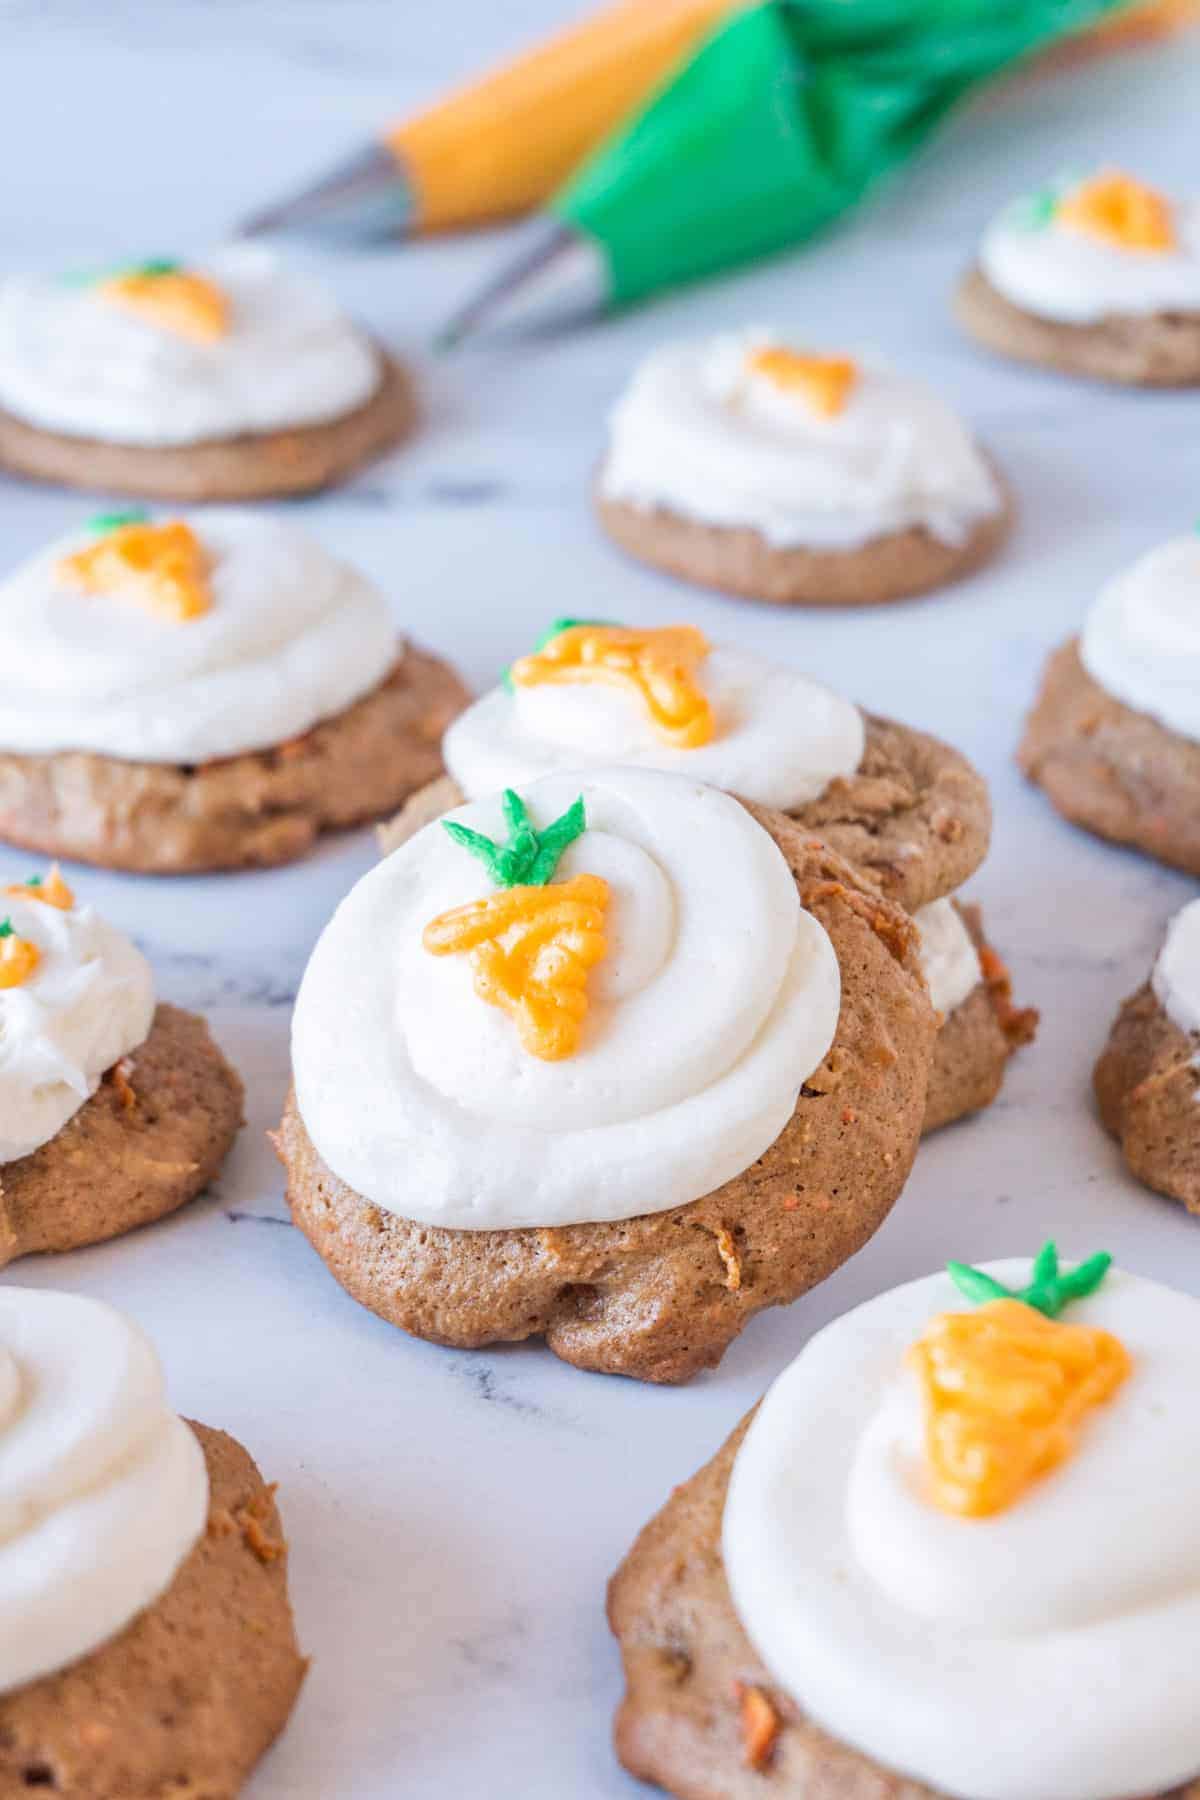 Cream Cheese Frosting on Carrot Cake Cookies